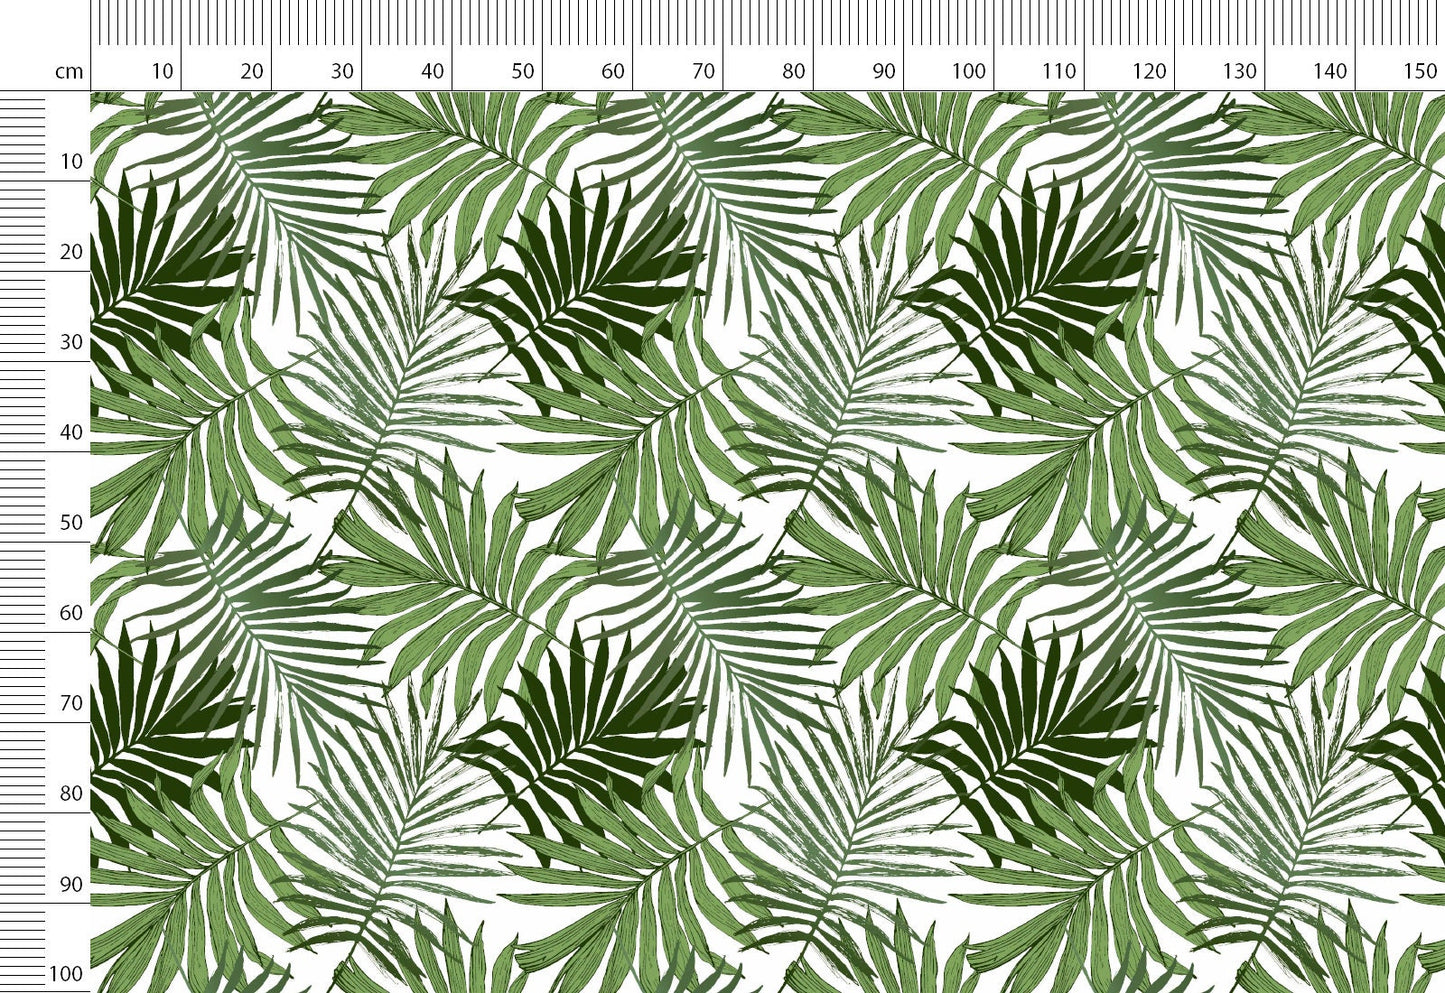 Linen Fabric Palm Leaves Print  By The Yard Natural Linen Fabric By The Yard For Clothes For & Home Textile - Width 148 cm/1.62yd